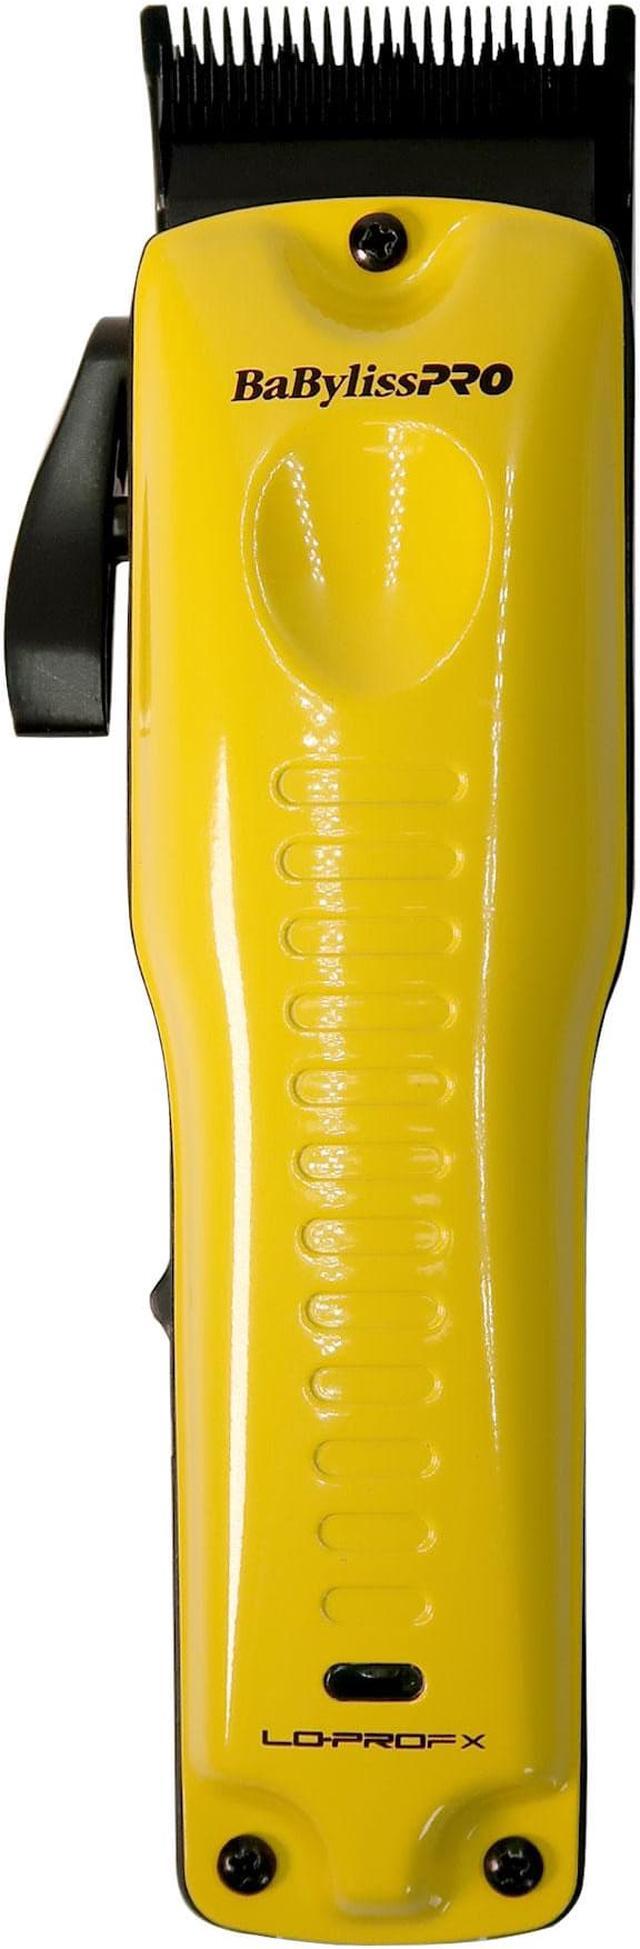 BaByliss Pro Limited Edition LO-PROFX Cordless Clipper (Andy Authentic)  Yellow #FX825YI